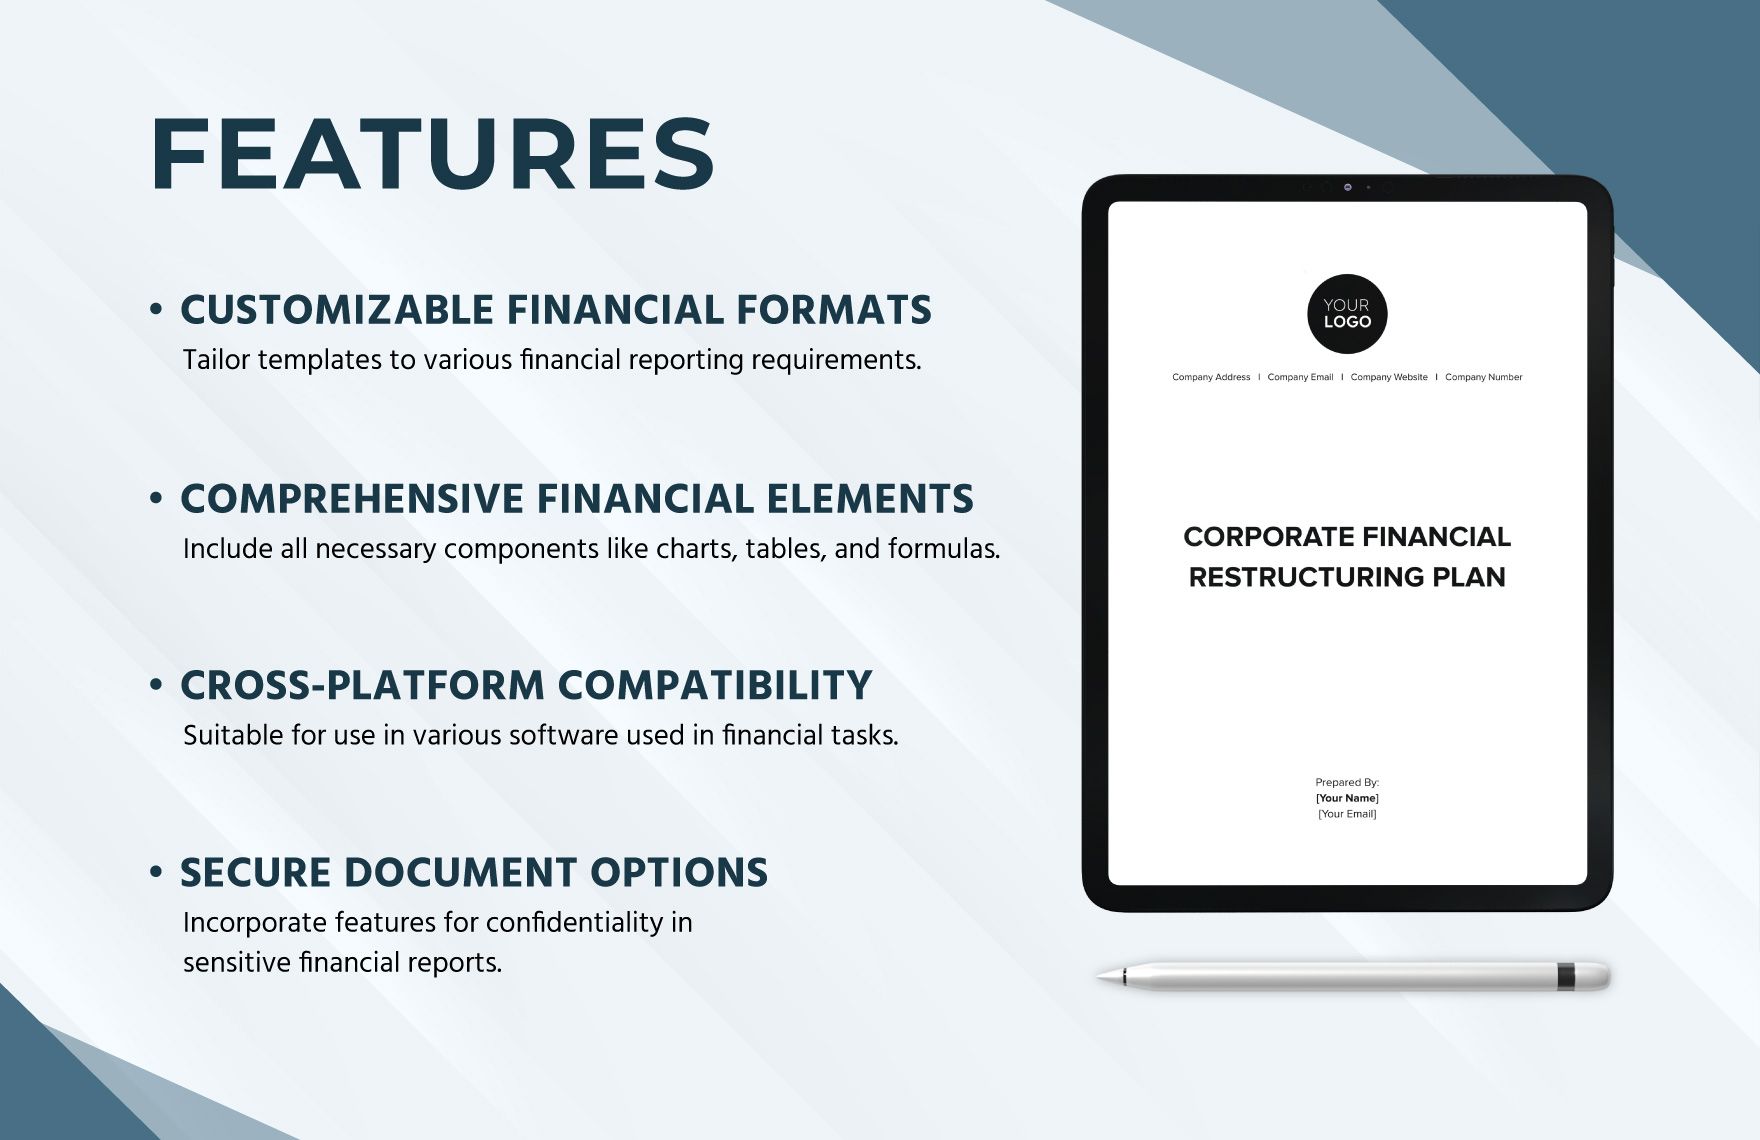 Corporate Financial Restructuring Plan Template